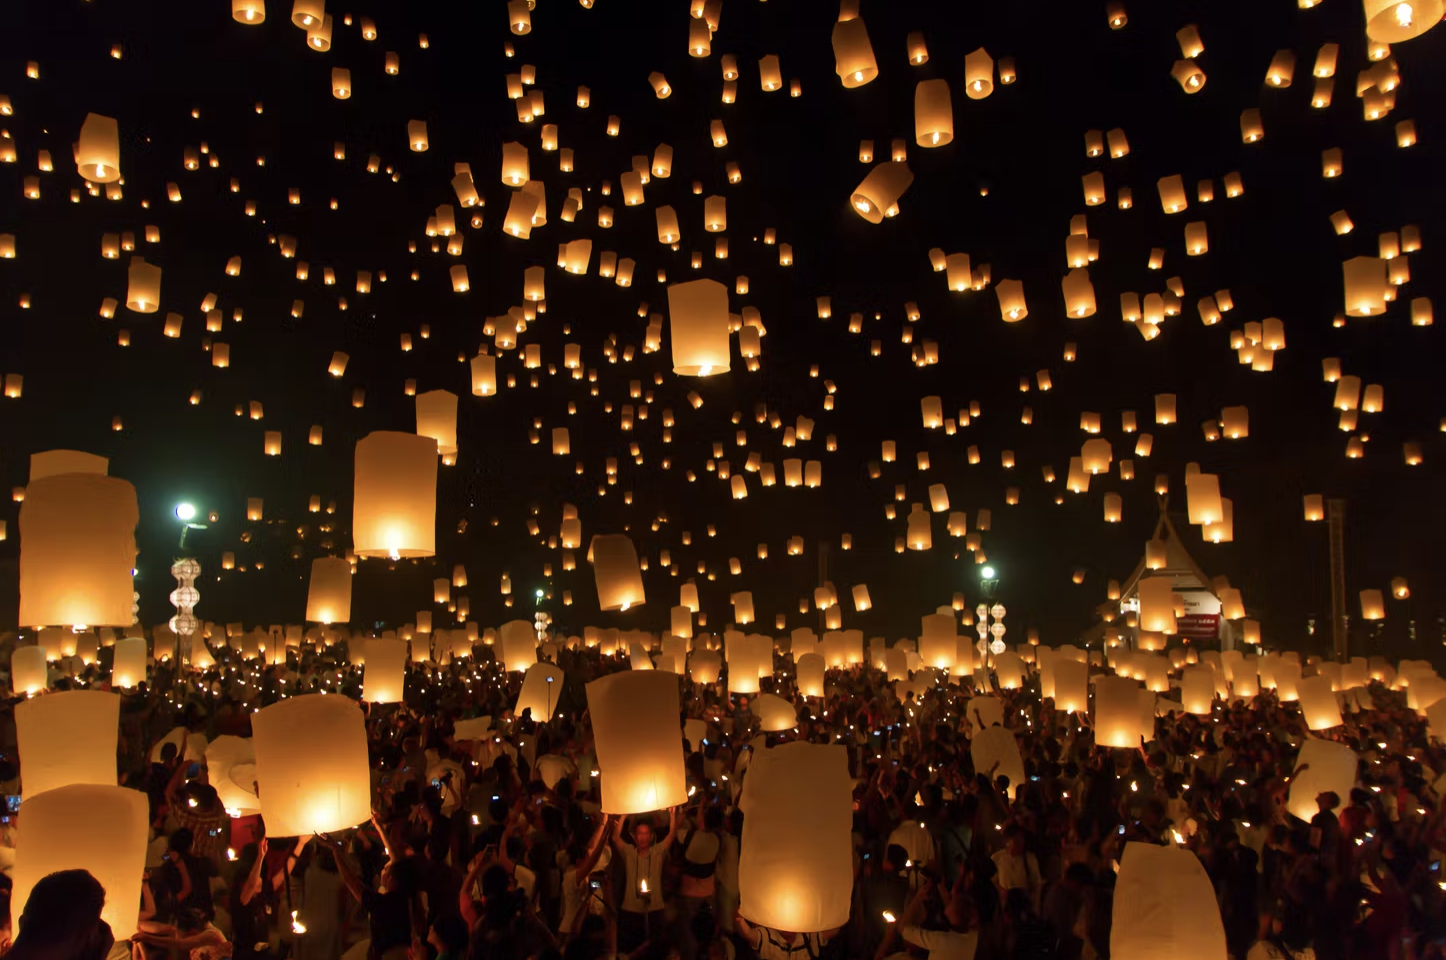 A night sky is filled with yellow lanterns floating with people lifting them off into the air